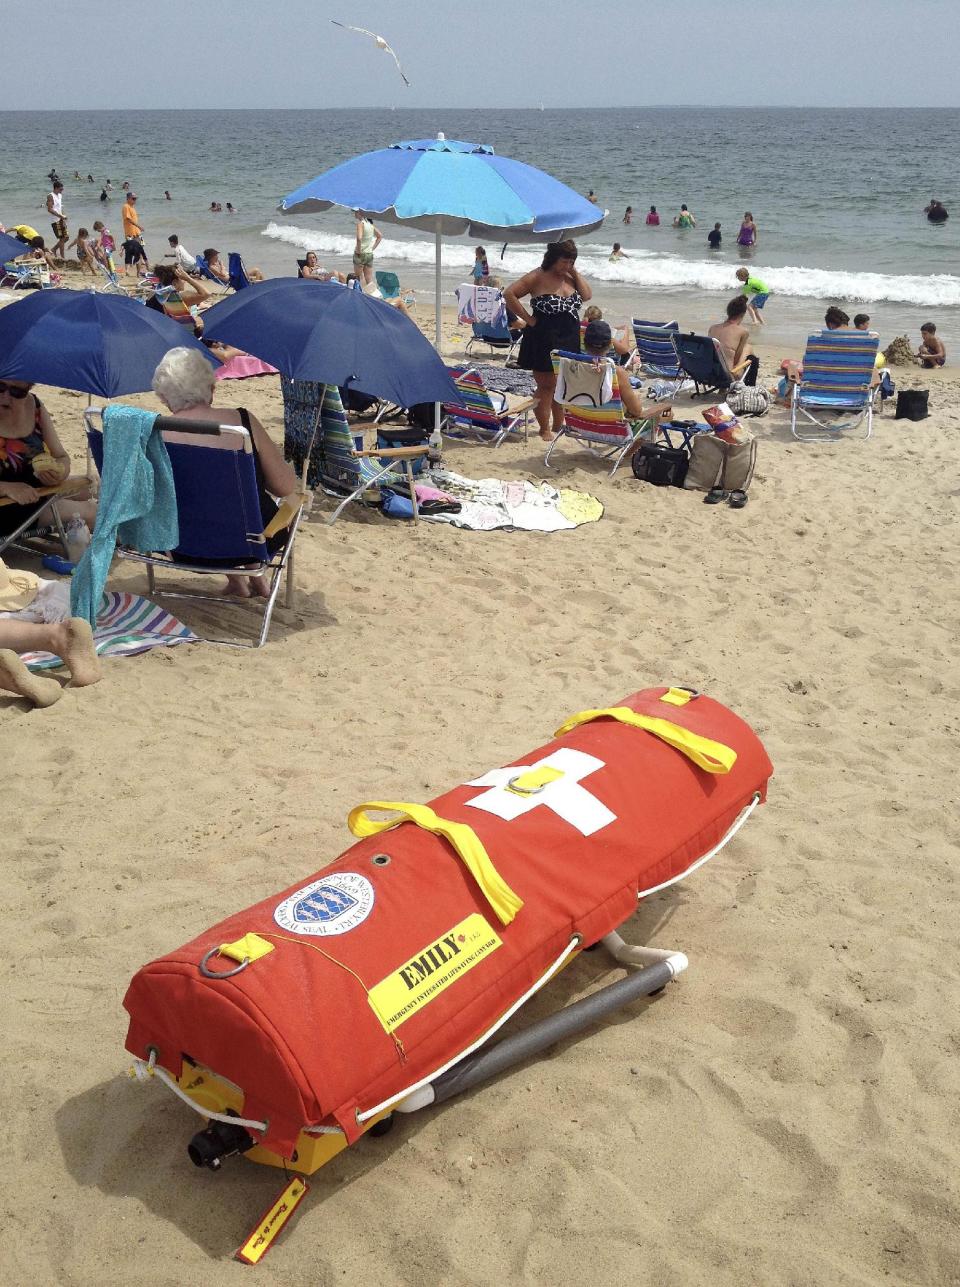 In this Wednesday, Aug, 8, 2012 photo, EMILY, (Emergency Integrated Lifesaving Lanyard) a remote-controlled battery powered lifesaving device, sits on Old Town Beach in Westerly, R.I. EMILY is a small watercraft fitted with a flotation device and can go up to 22 mph, allowing it to get to people more quickly, and in some cases more safely, than any human. (AP Photo/Michelle R. Smith)